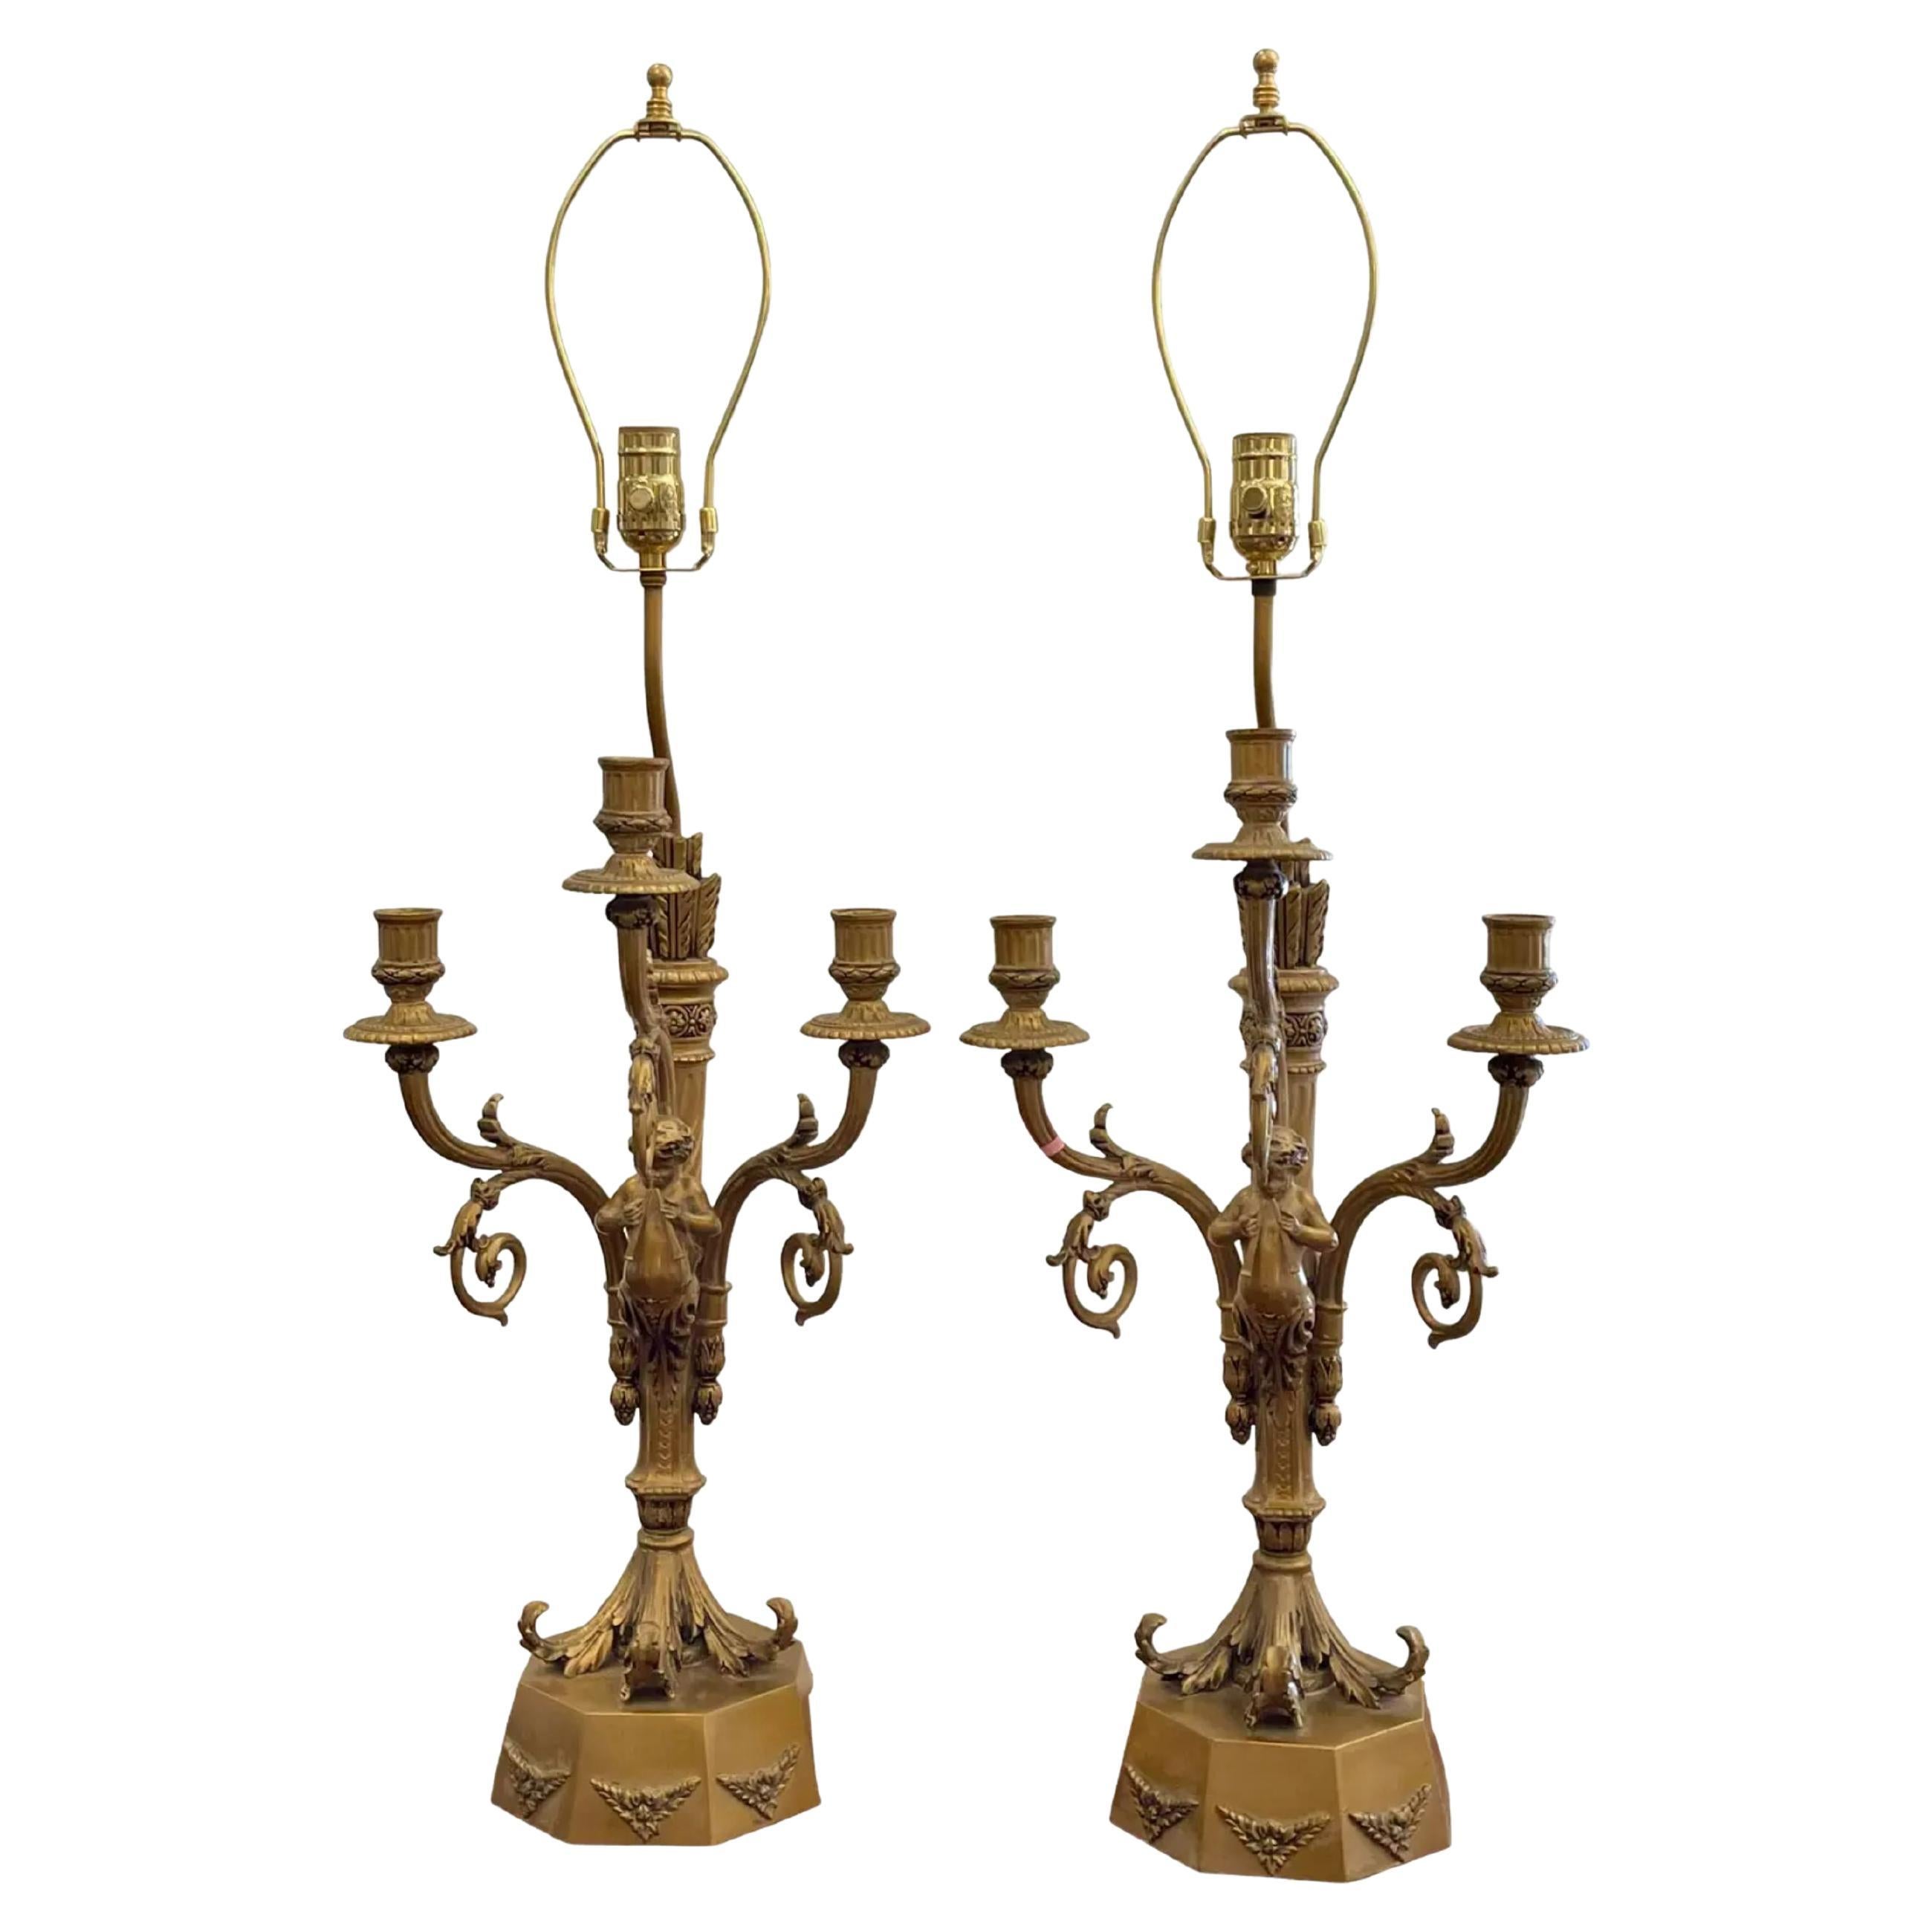 Pair of Hollywood Regency Candelabra Lamps with Trumpet Playing Putti